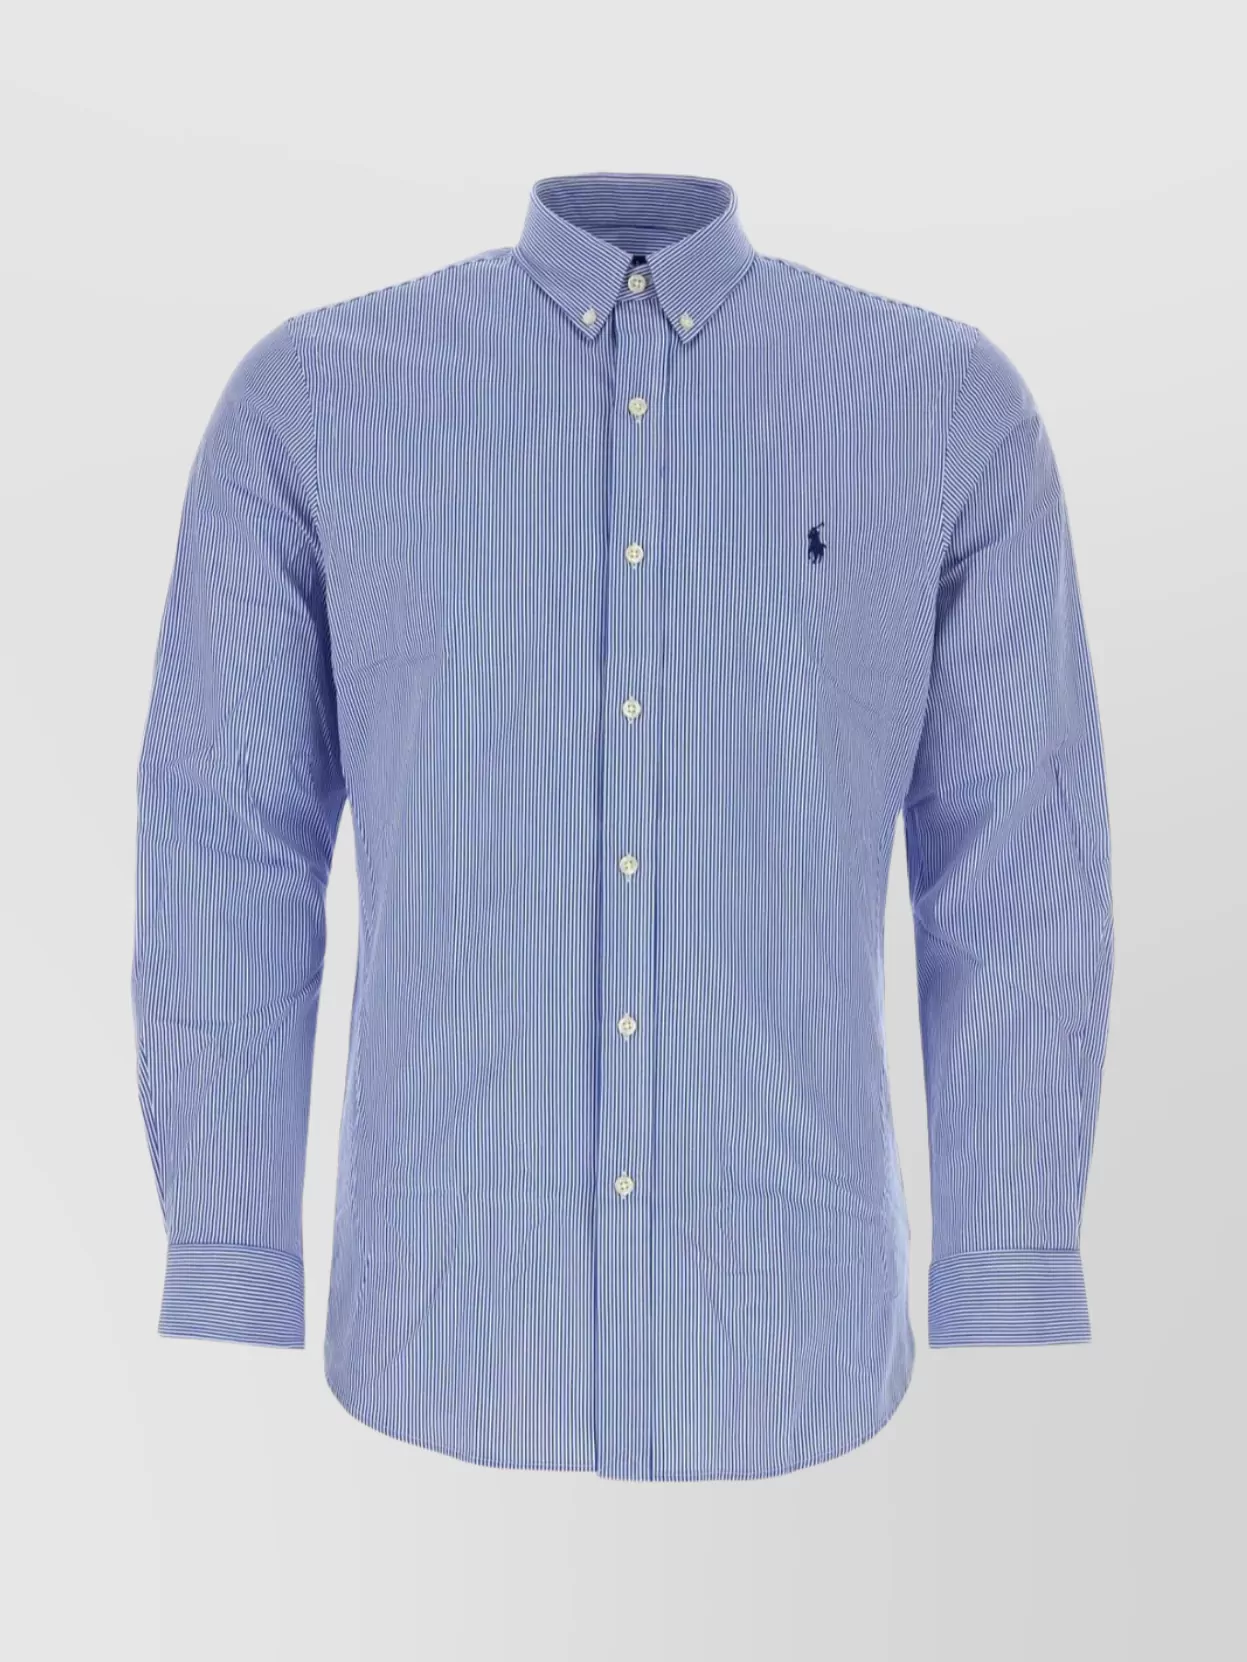 Shop Polo Ralph Lauren Embroidered Stretch Poplin Shirt With Cuffed Sleeves